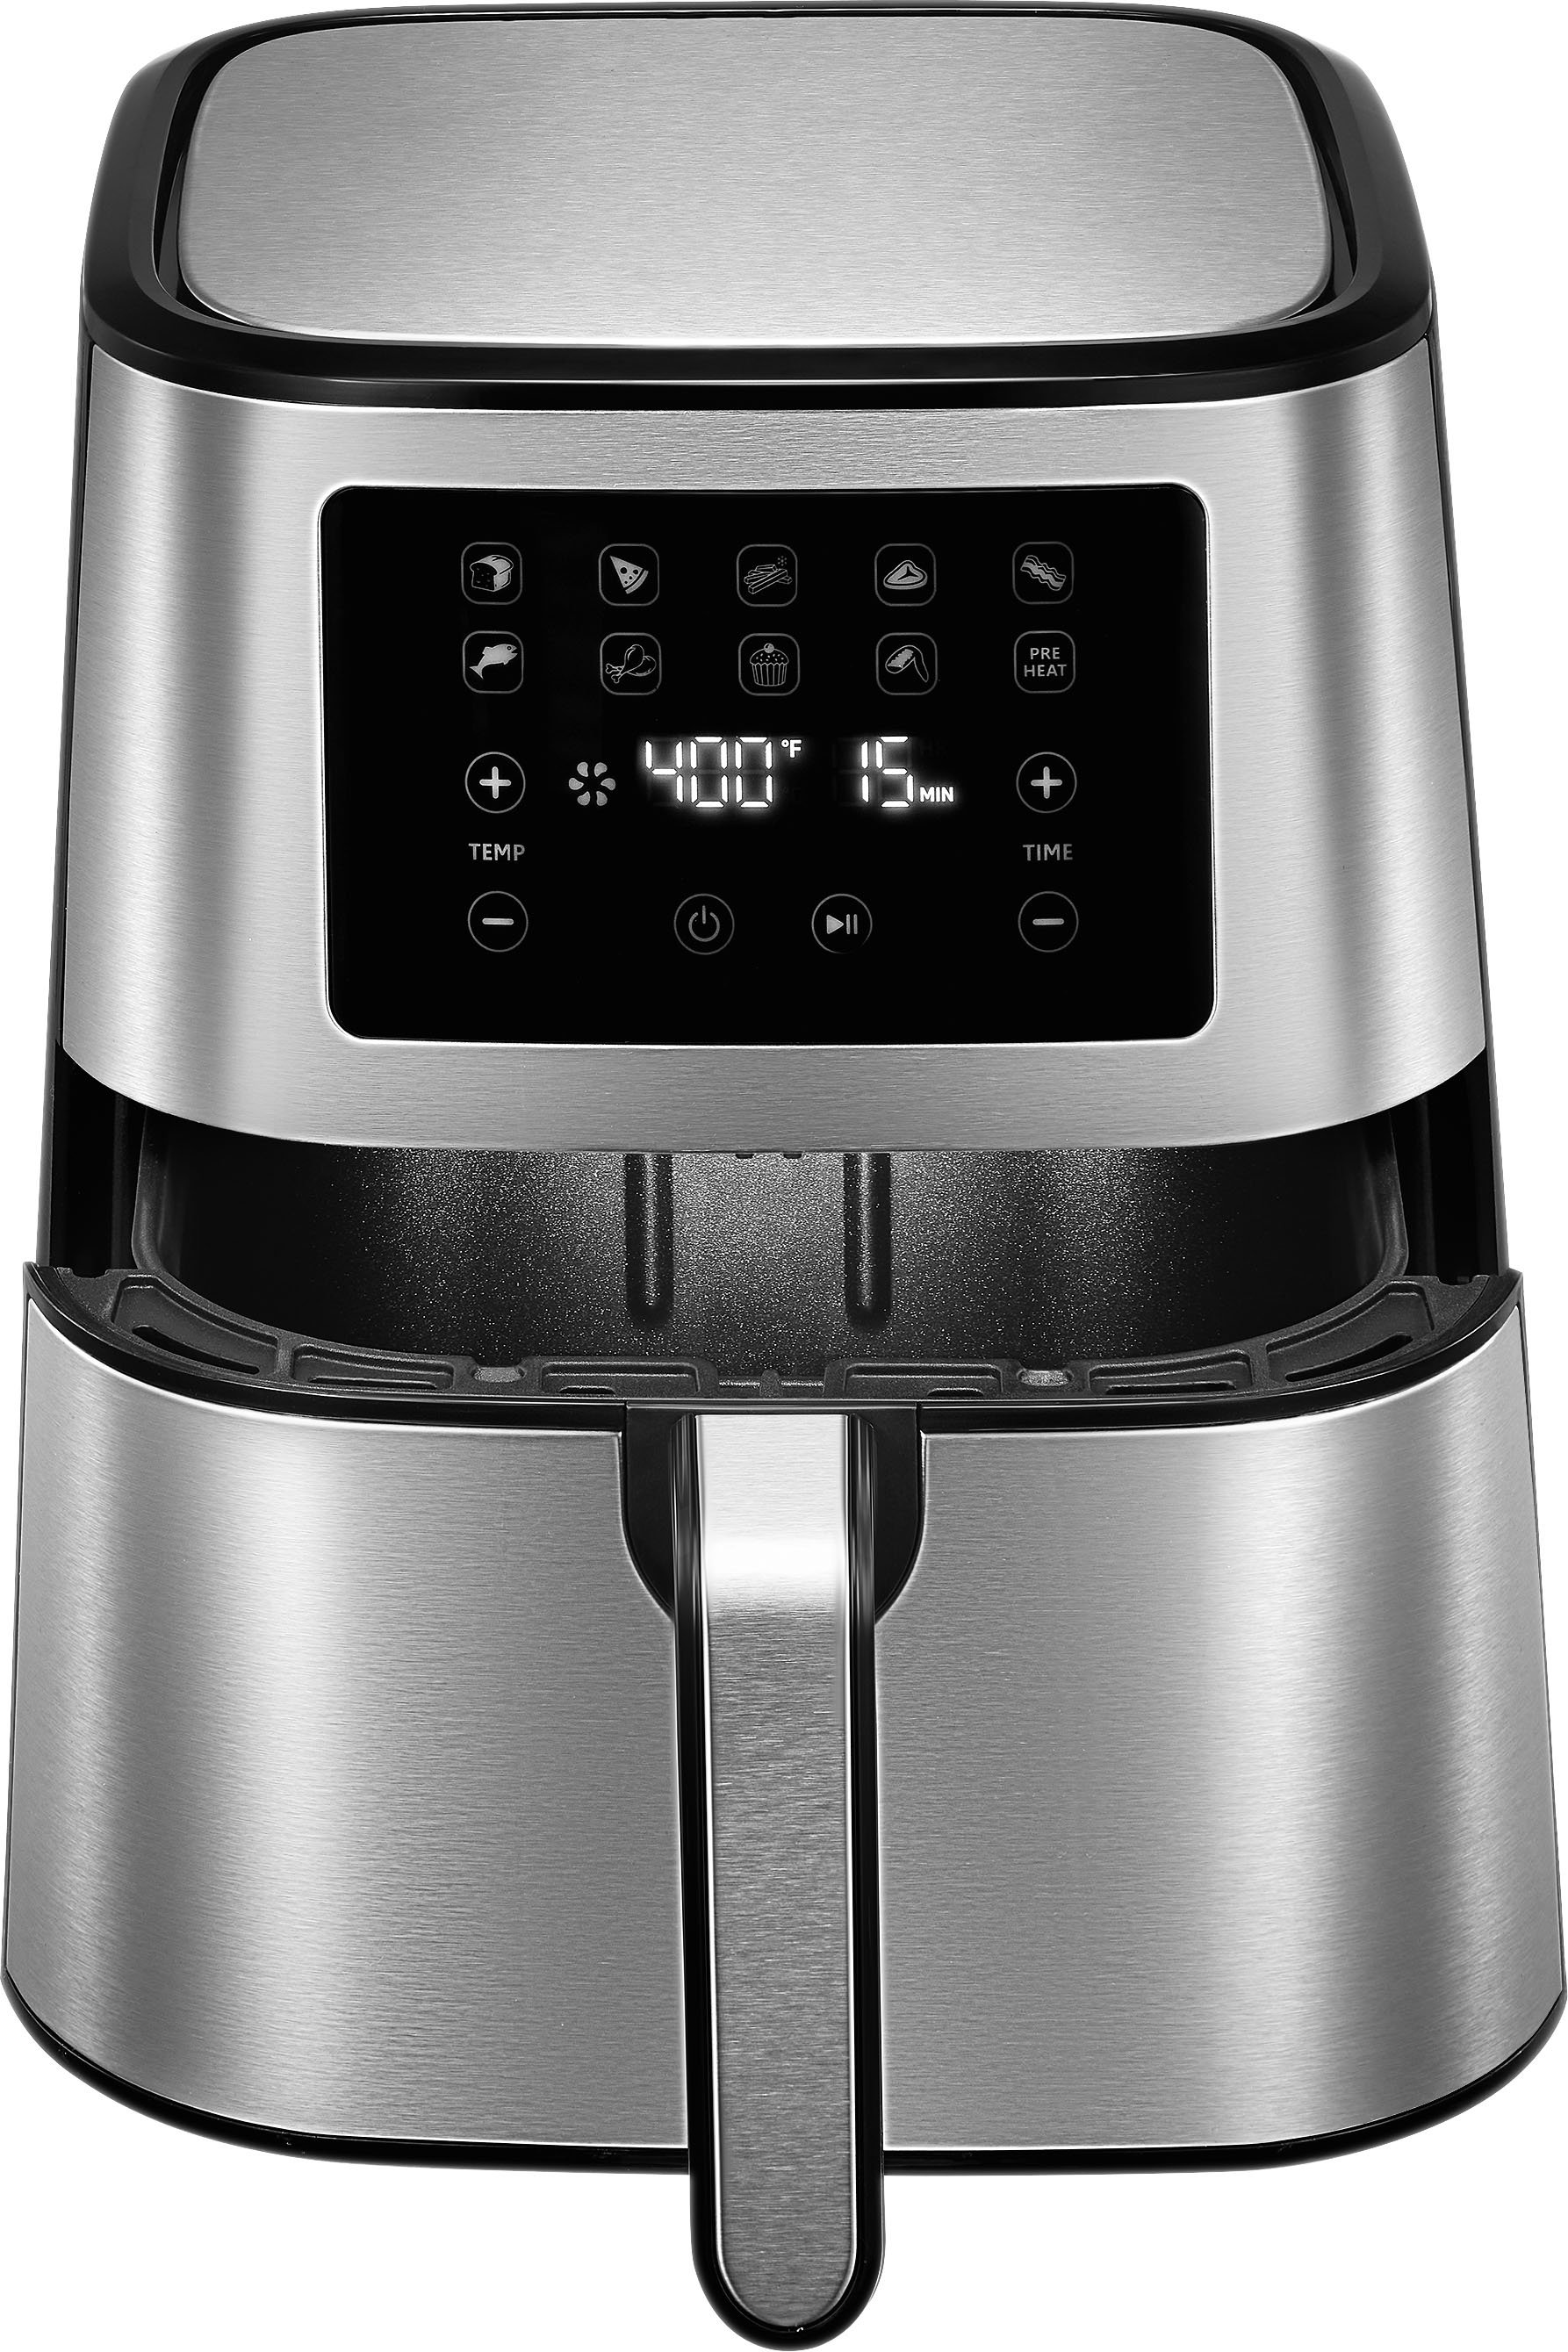 Best Buy: Insignia™ 8qt Digital Multi Cooker Stainless Steel NS